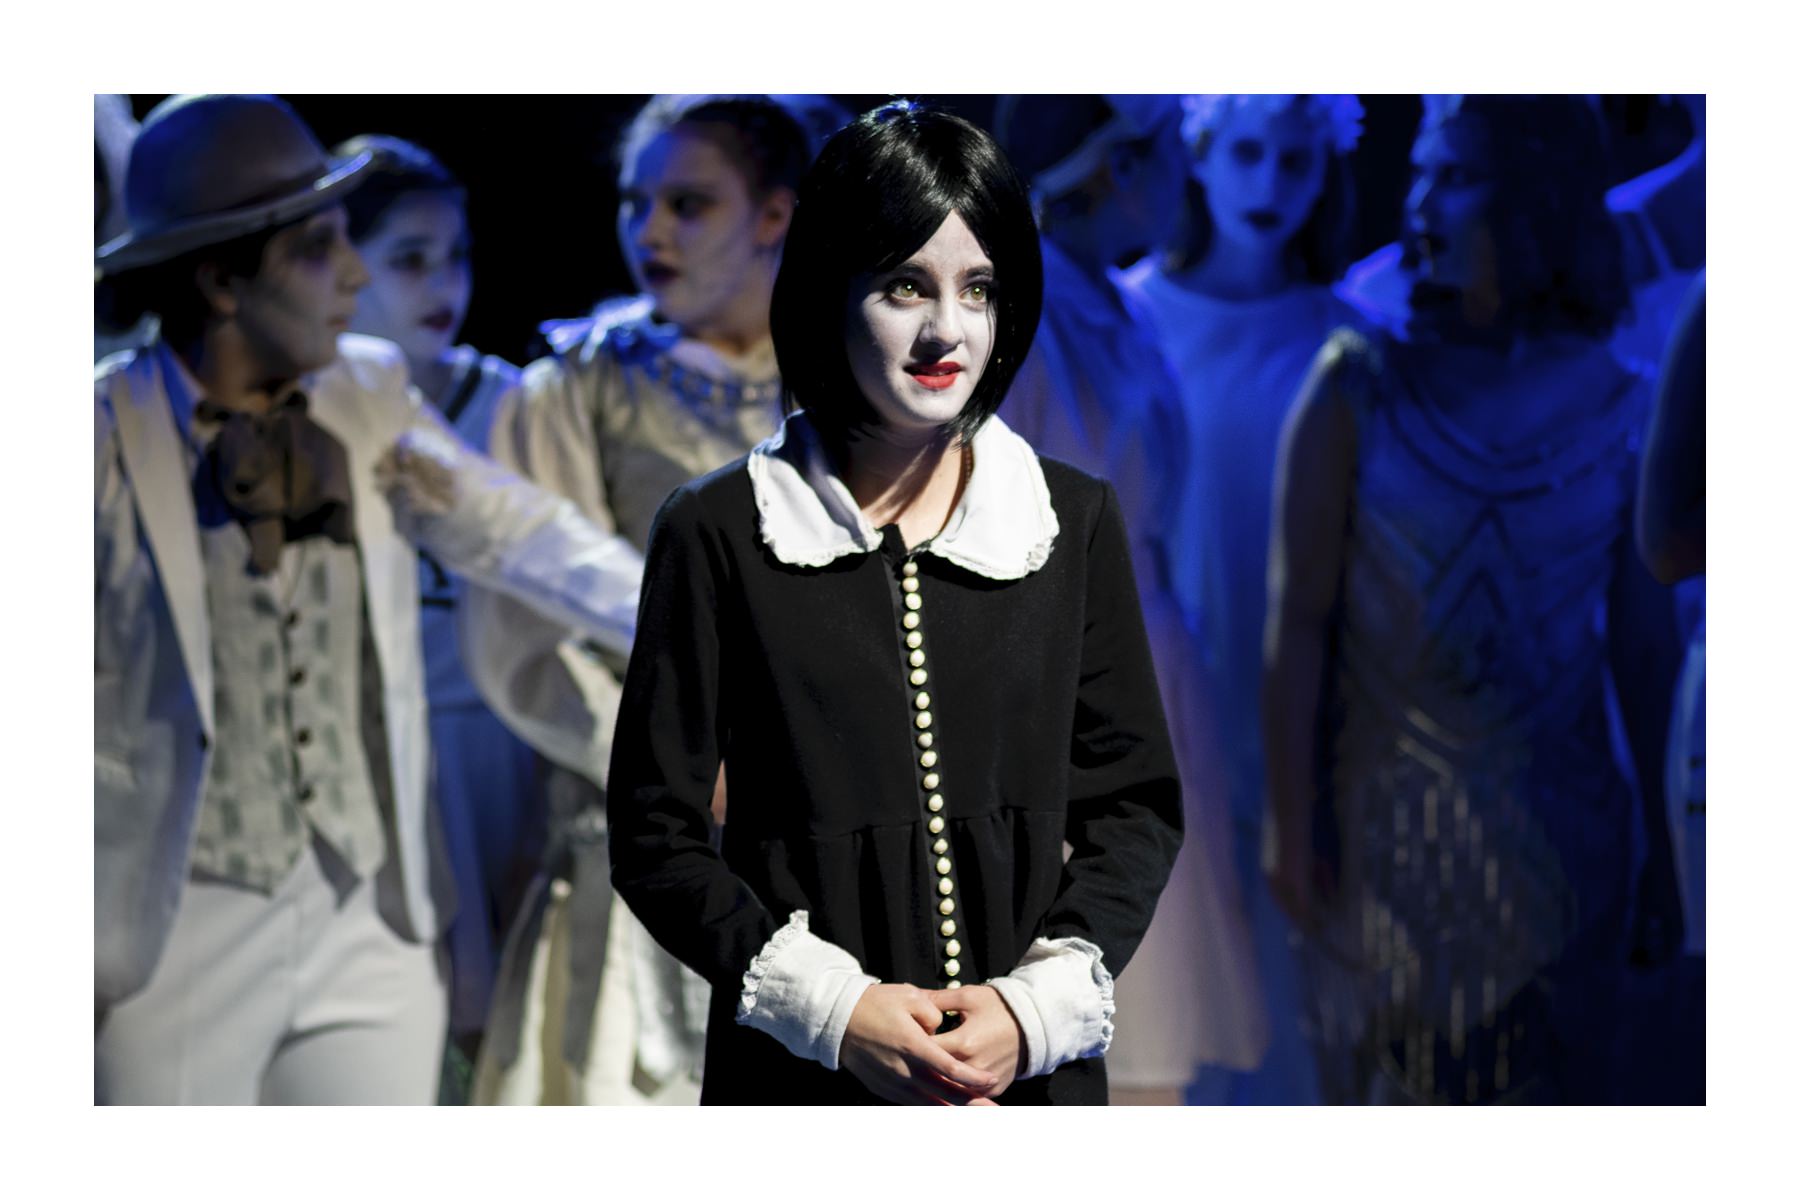 PLC Sydney - The Addams Family 2019 Photography by Christopher Hayles-0005.jpg